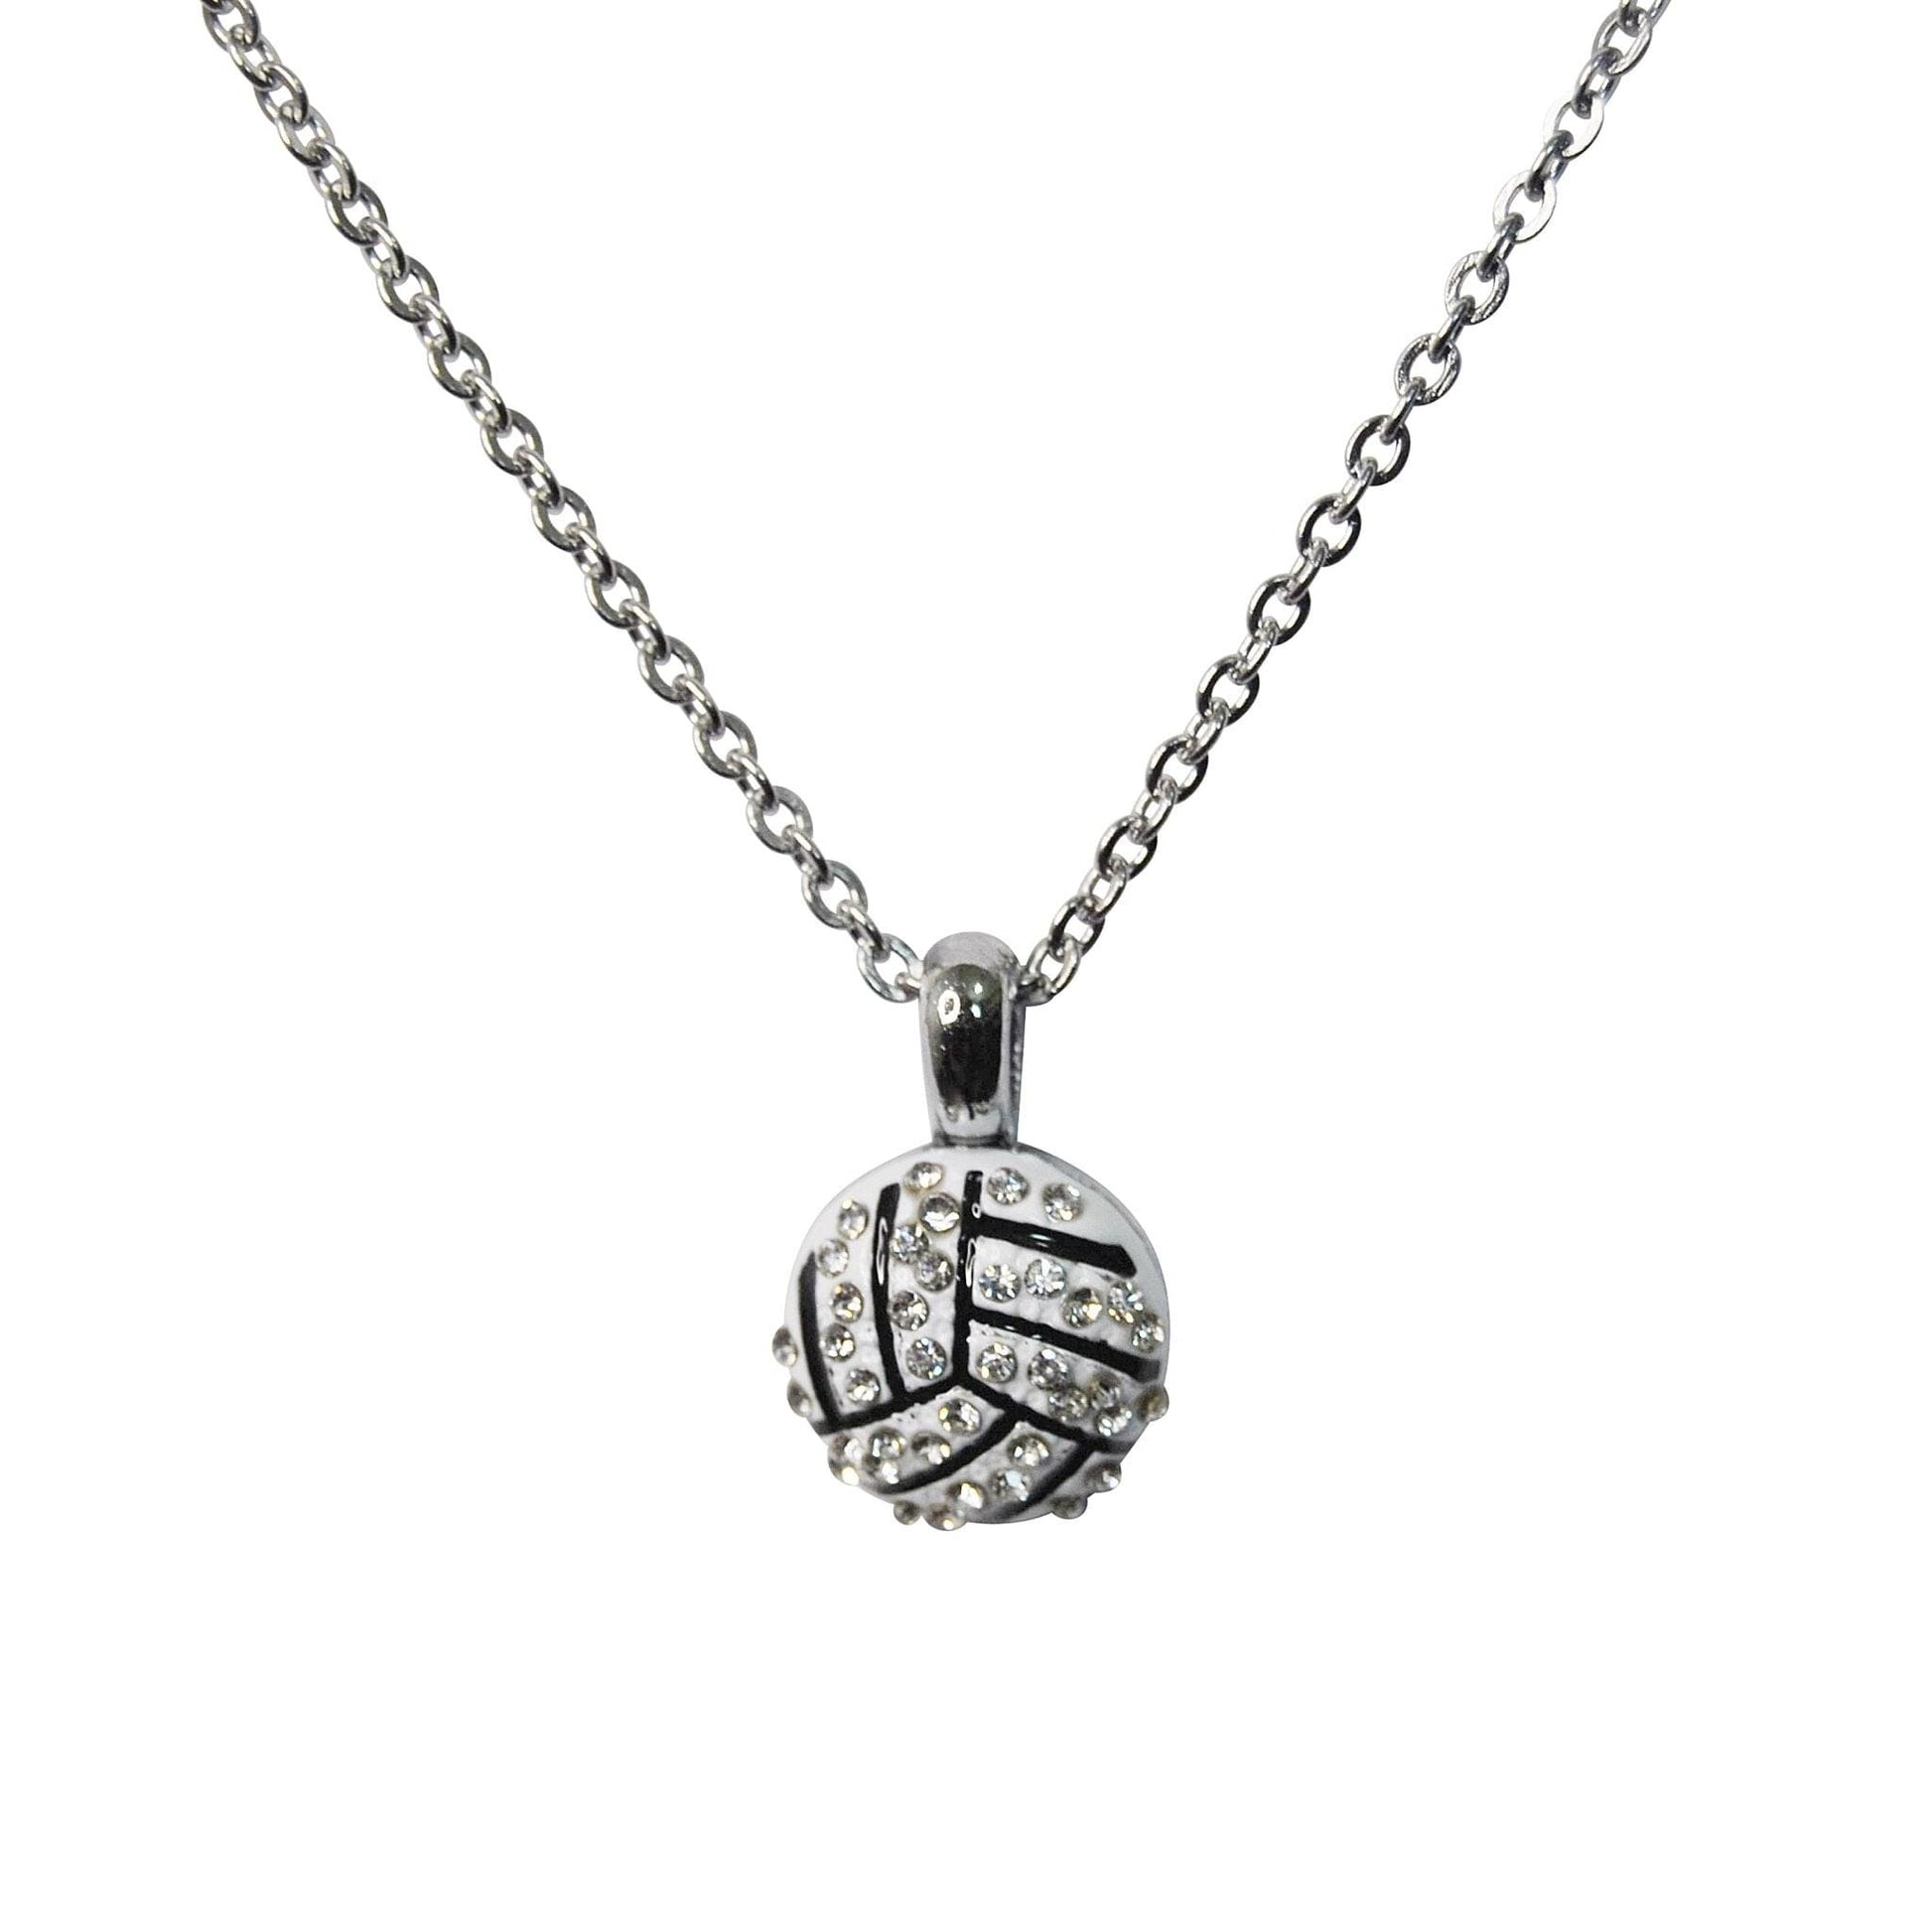 Studded Volleyball Pendant and Chain Necklace - Sportzzheads